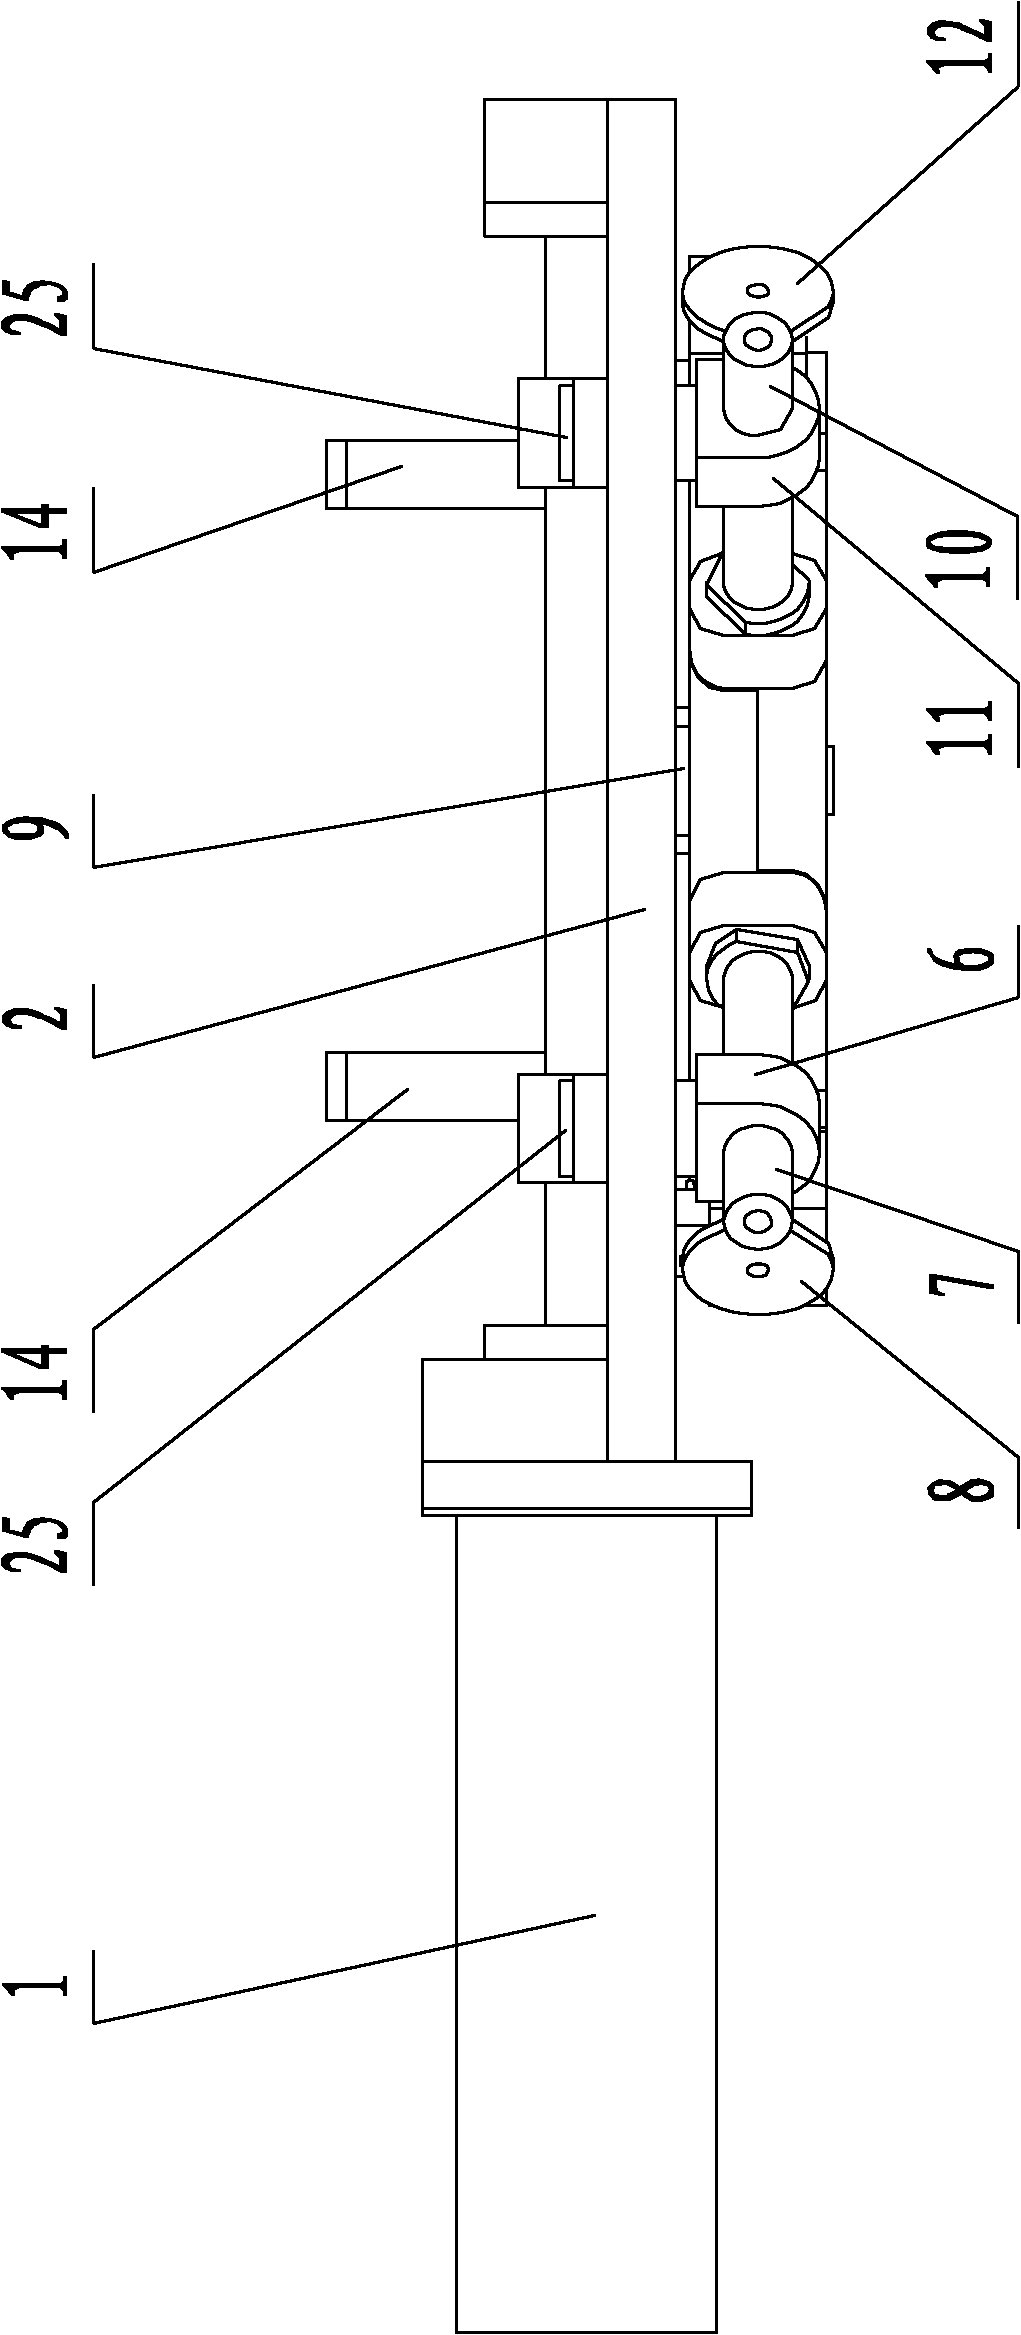 Wire stroking device for repairing broken strands of extra-high-voltage (EHV) transmission lines